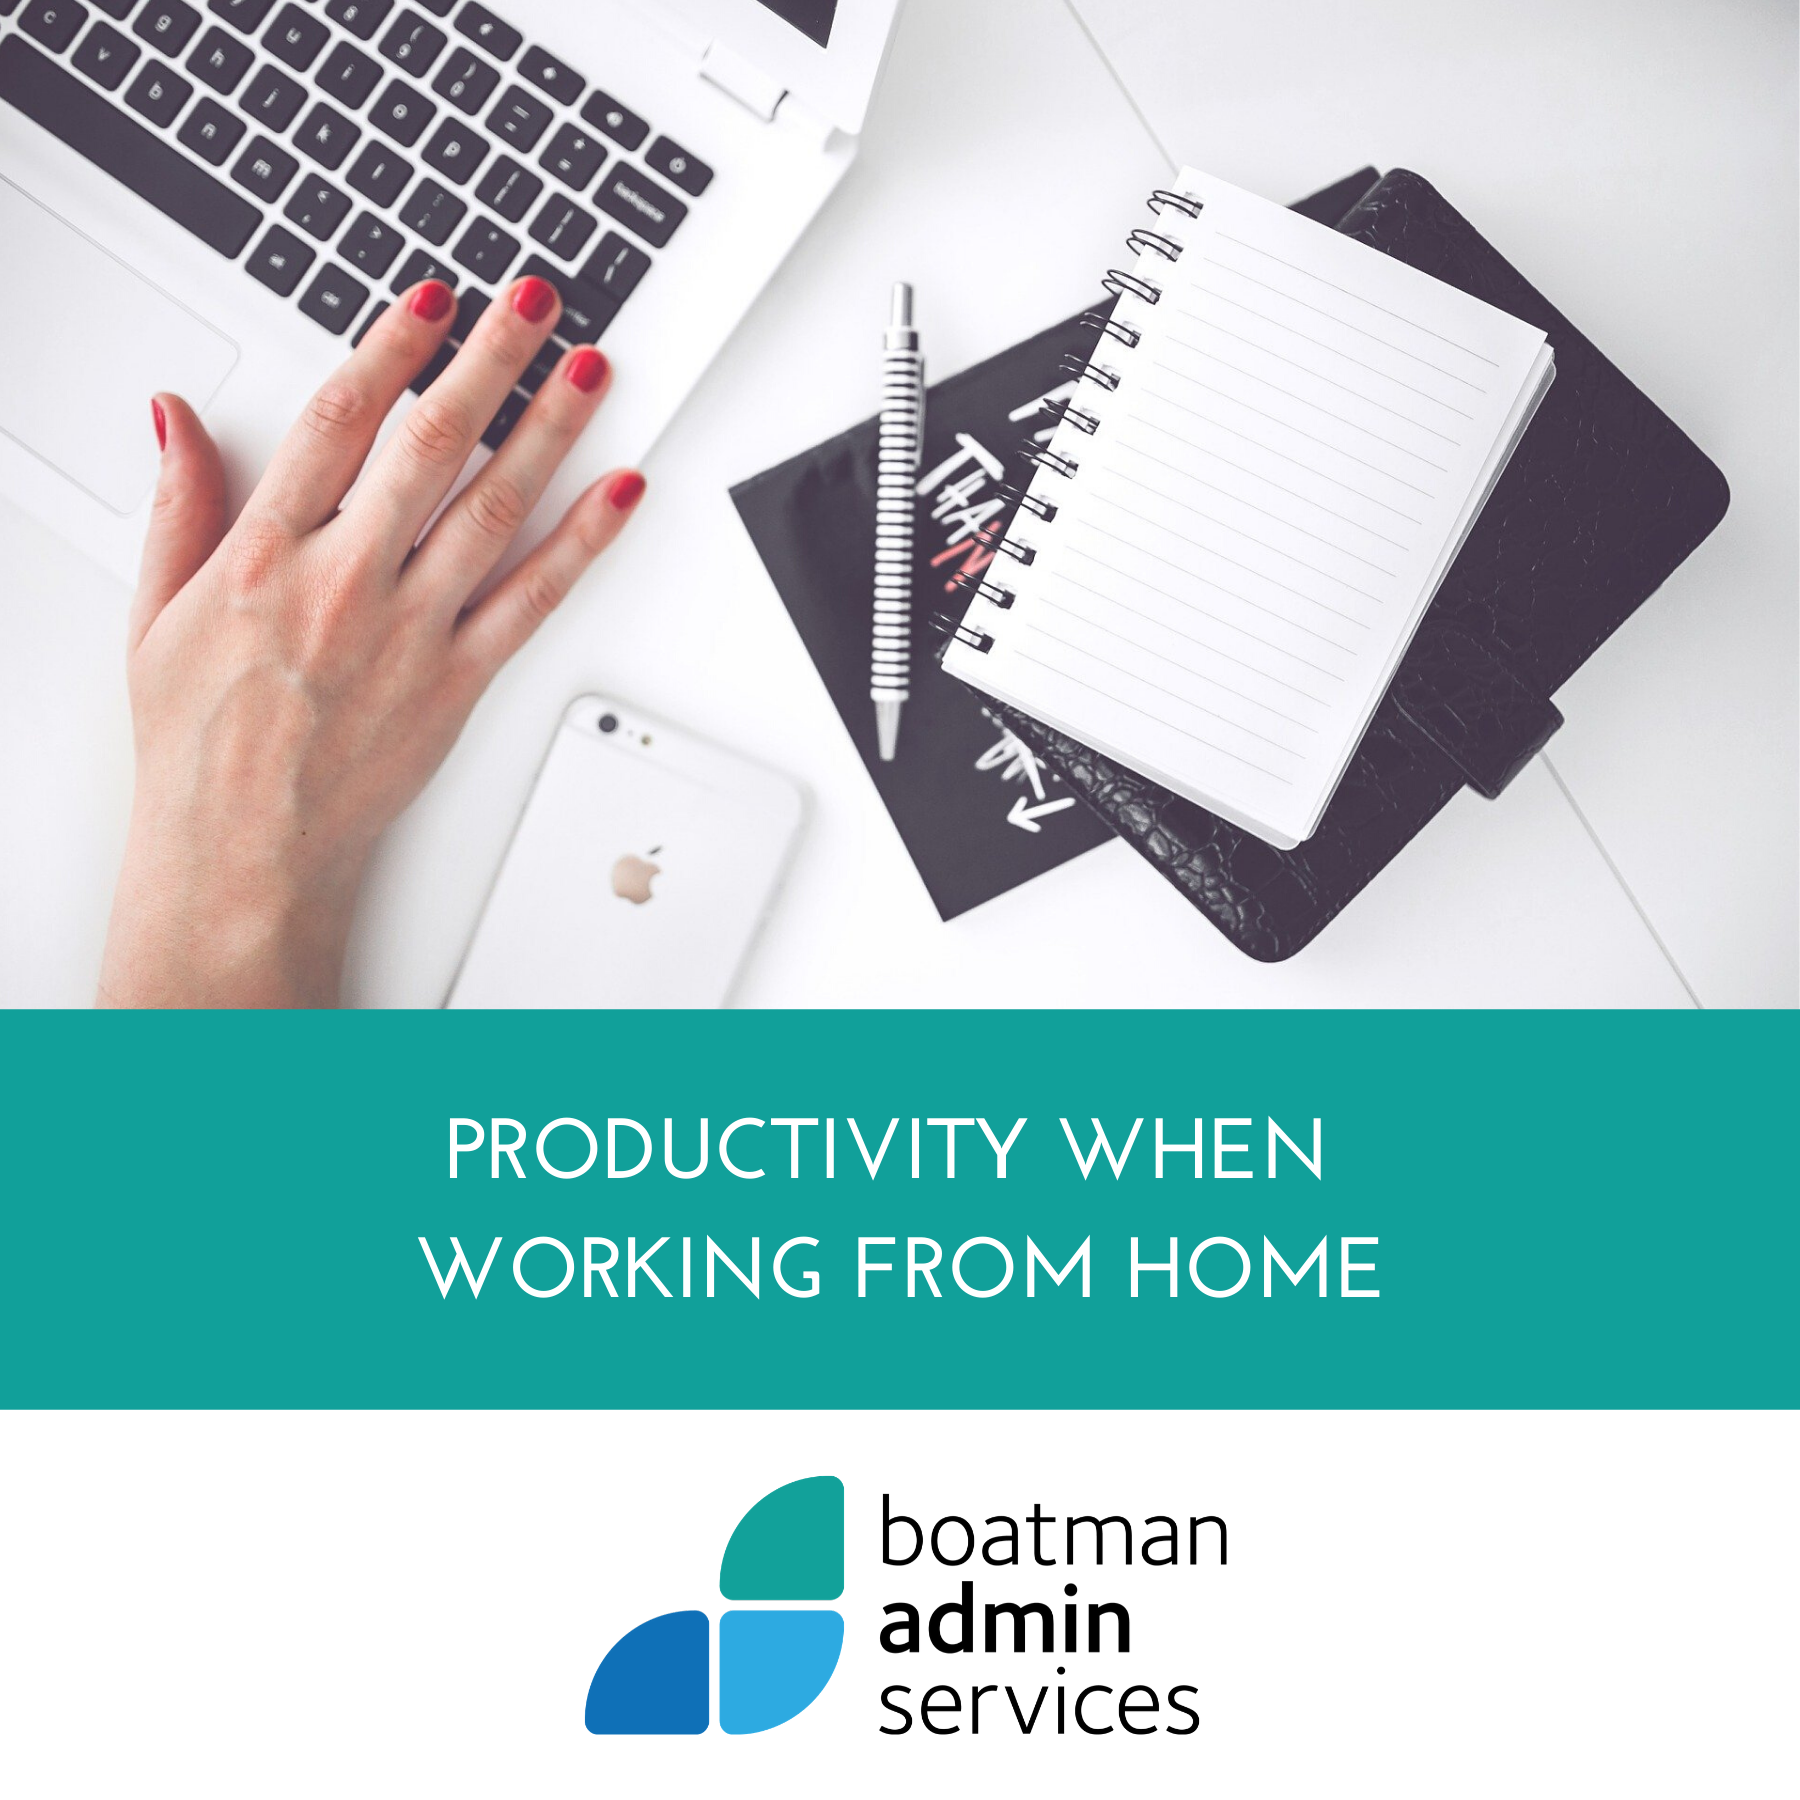 Productivity advice when working from home